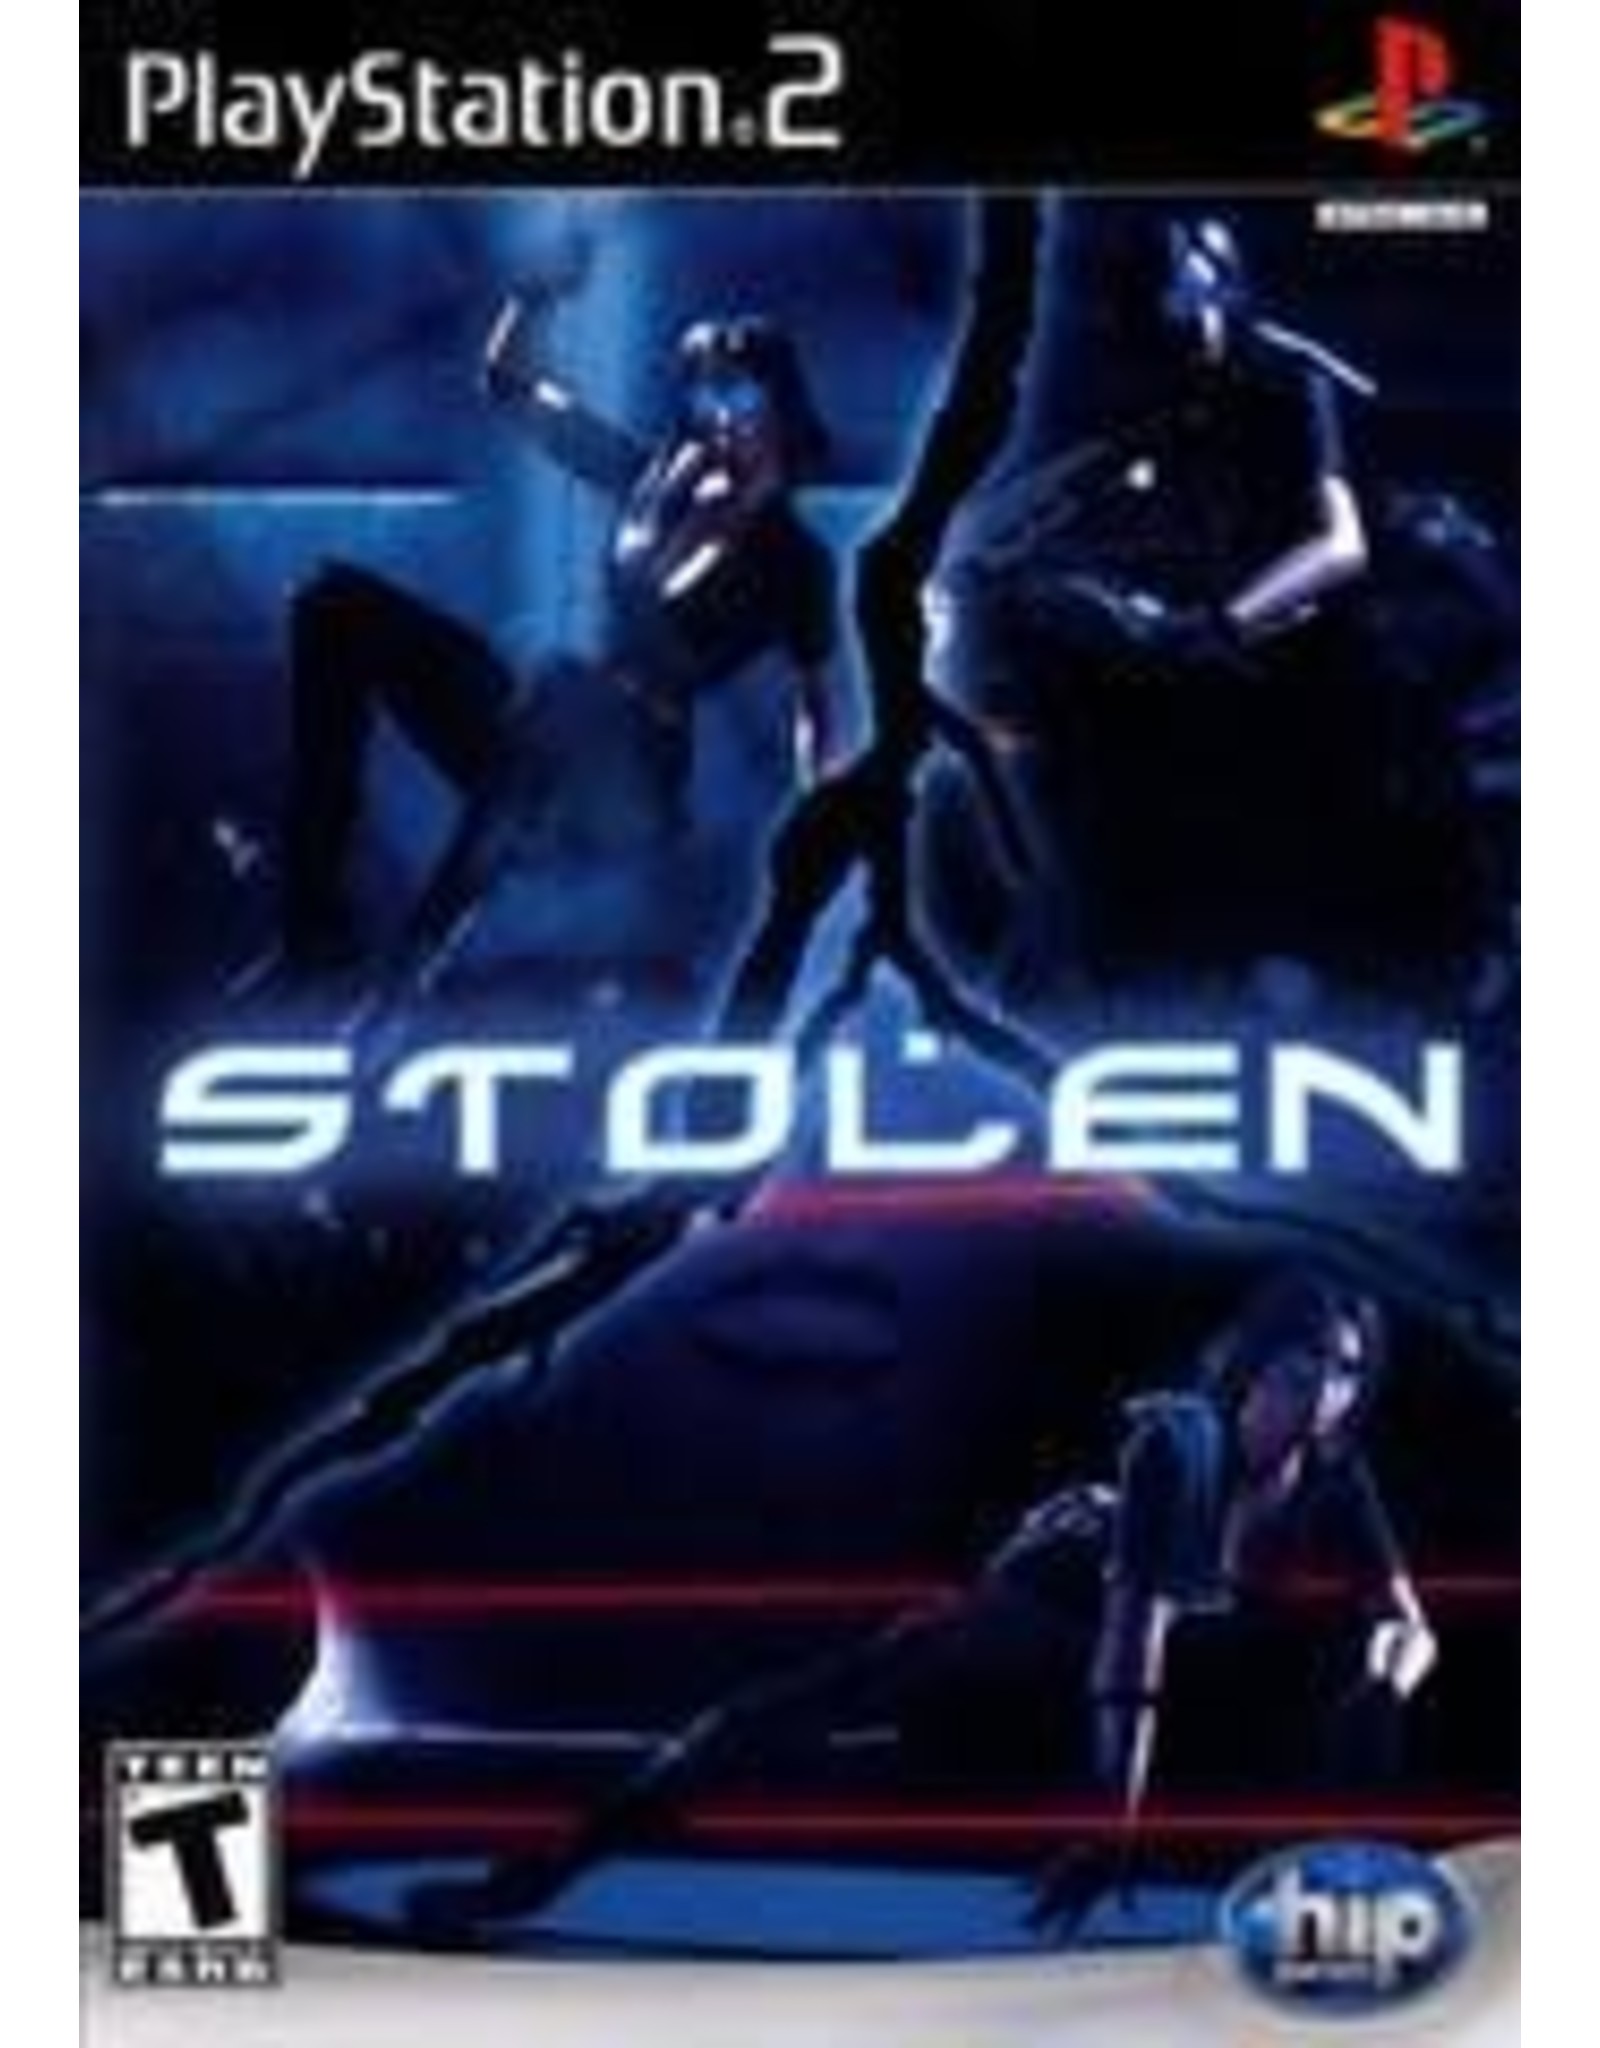 Playstation 2 Stolen (Used)